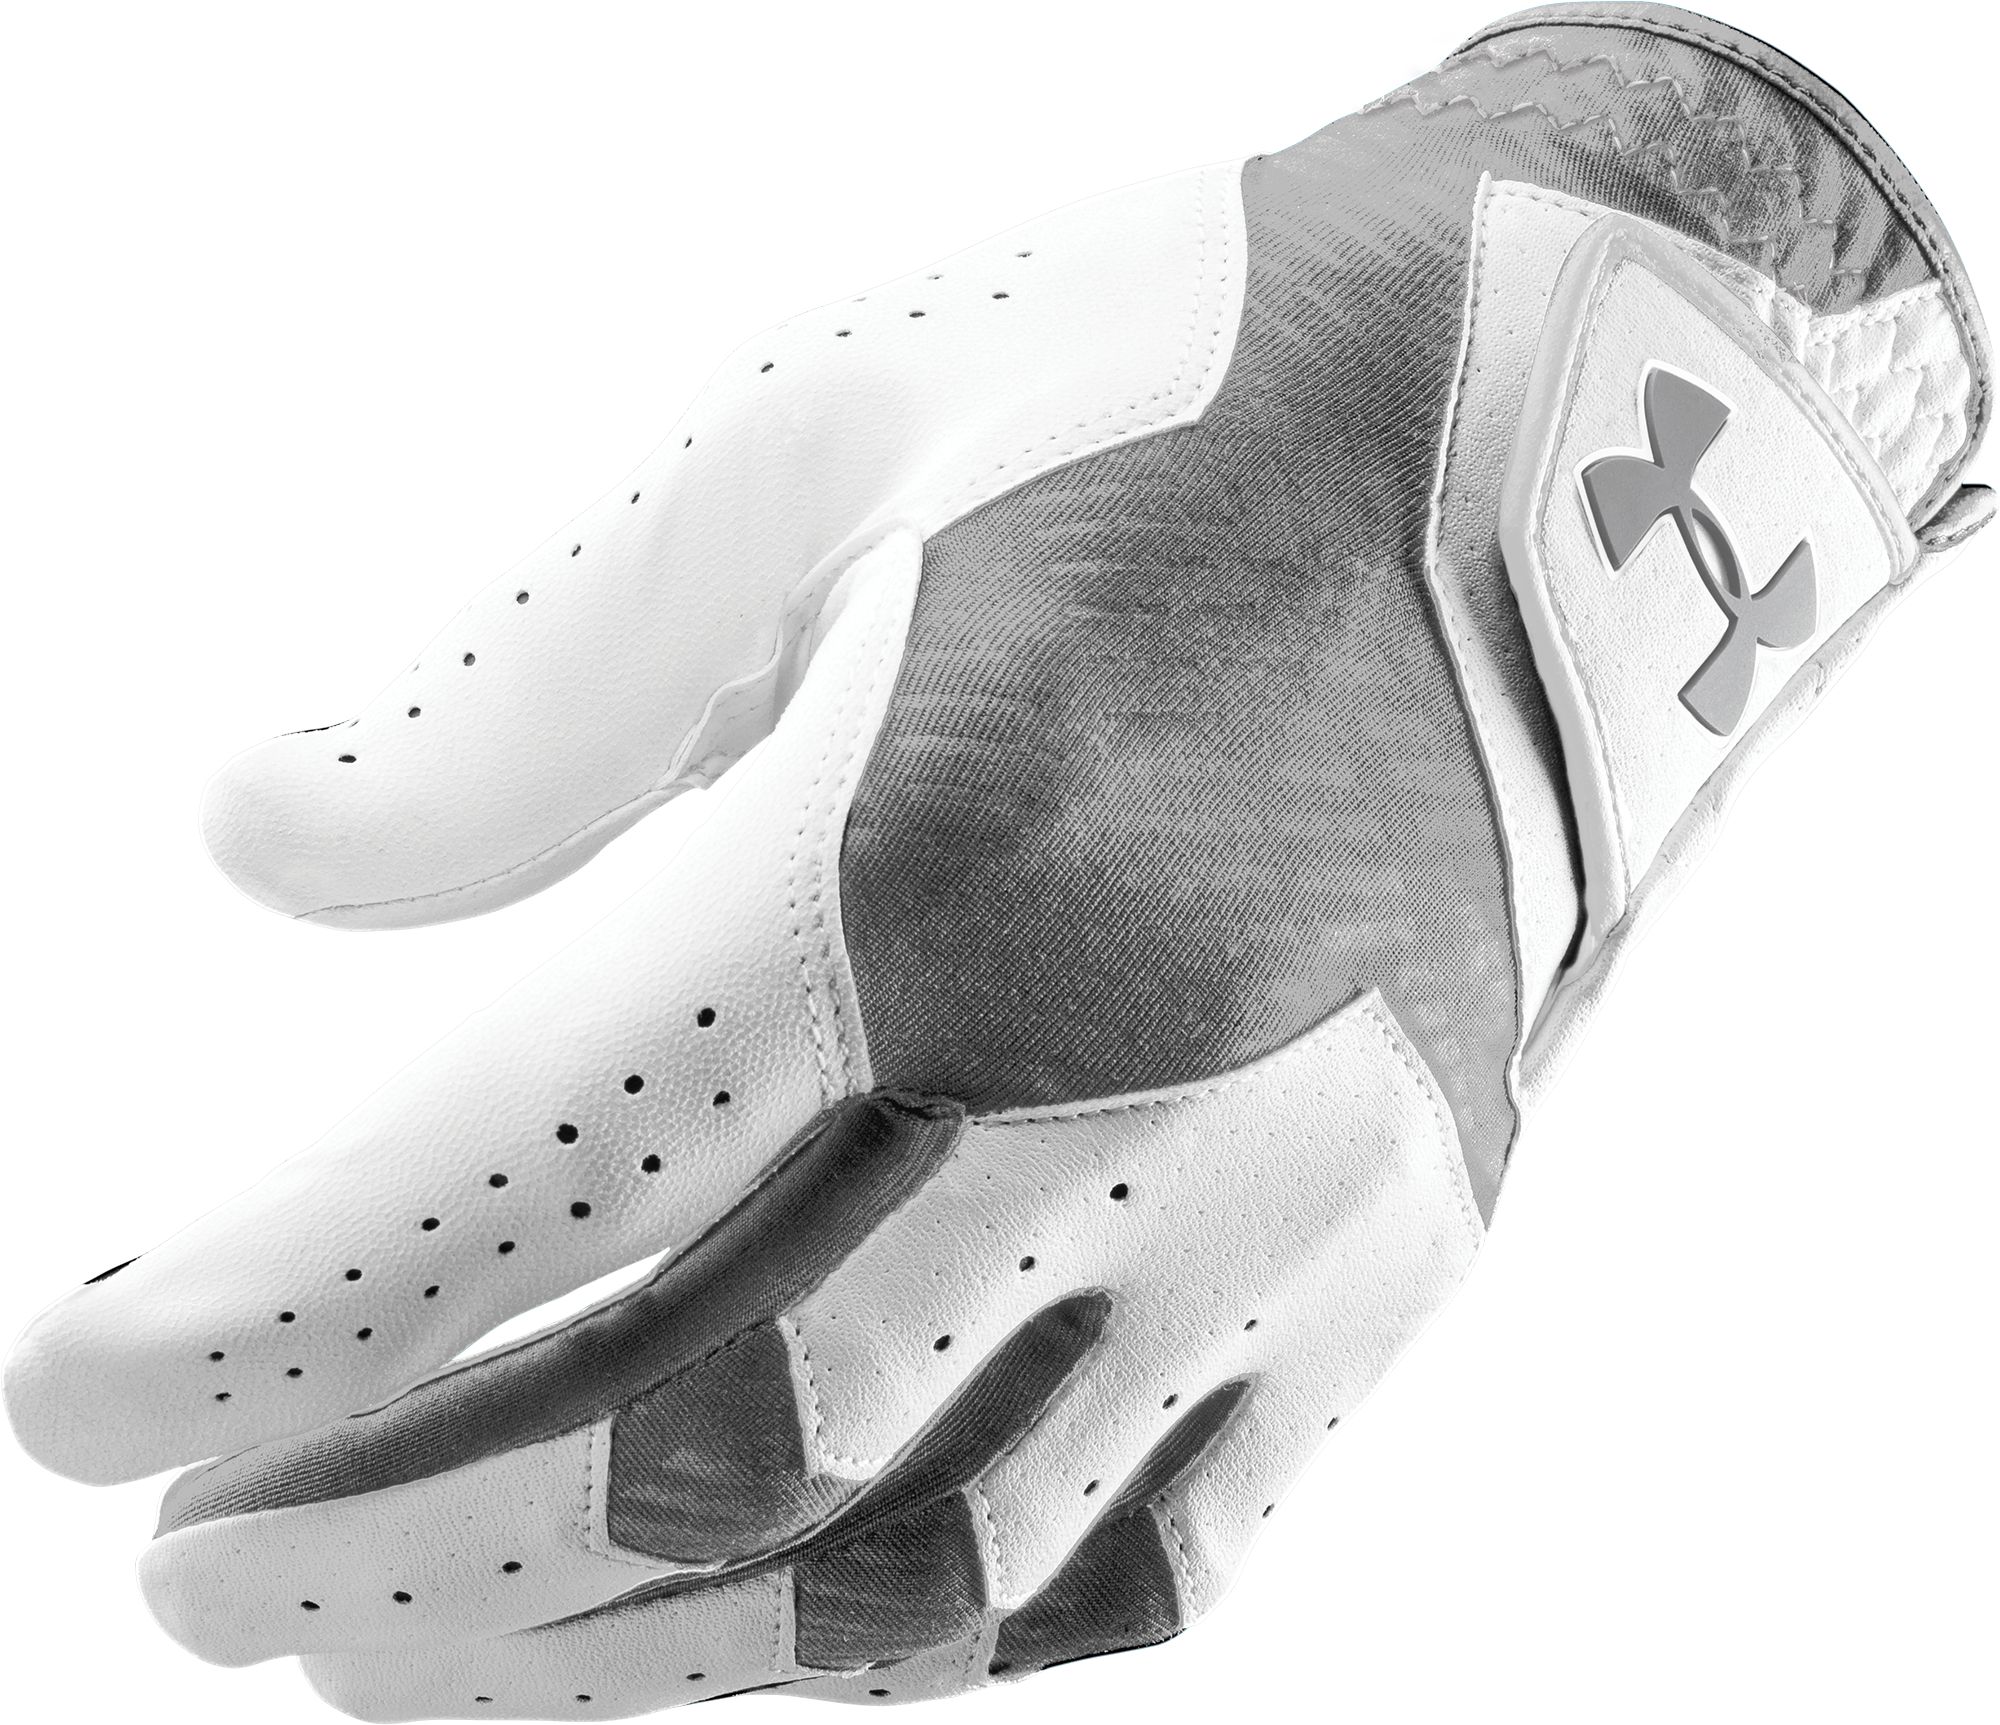 under armour coolswitch glove